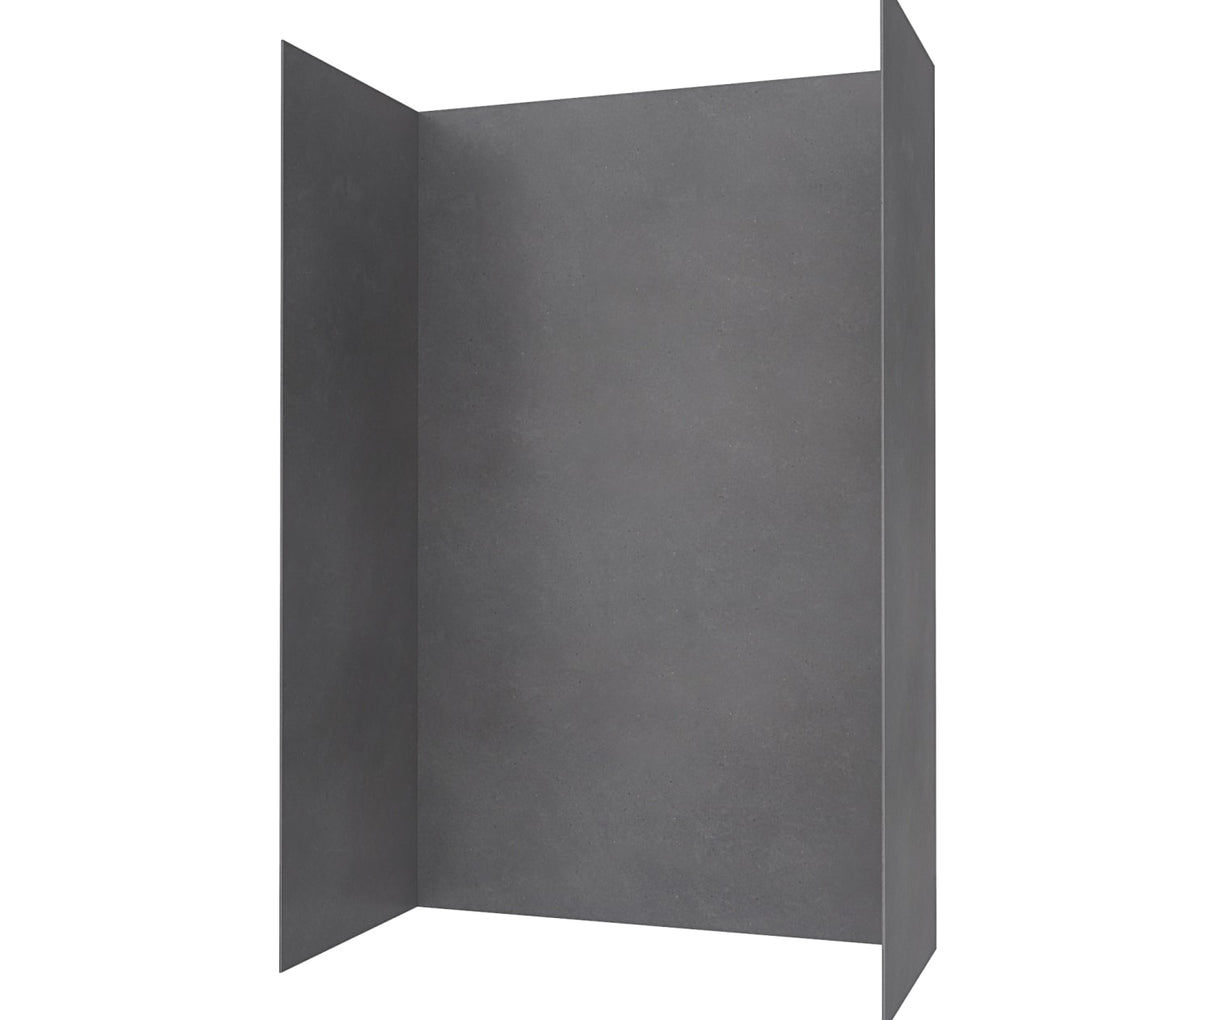 Swanstone SMMK96-3262 32 x 62 x 96 Swanstone Smooth Tile Glue up Tub Wall Kit in Charcoal Gray SMMK963262.209